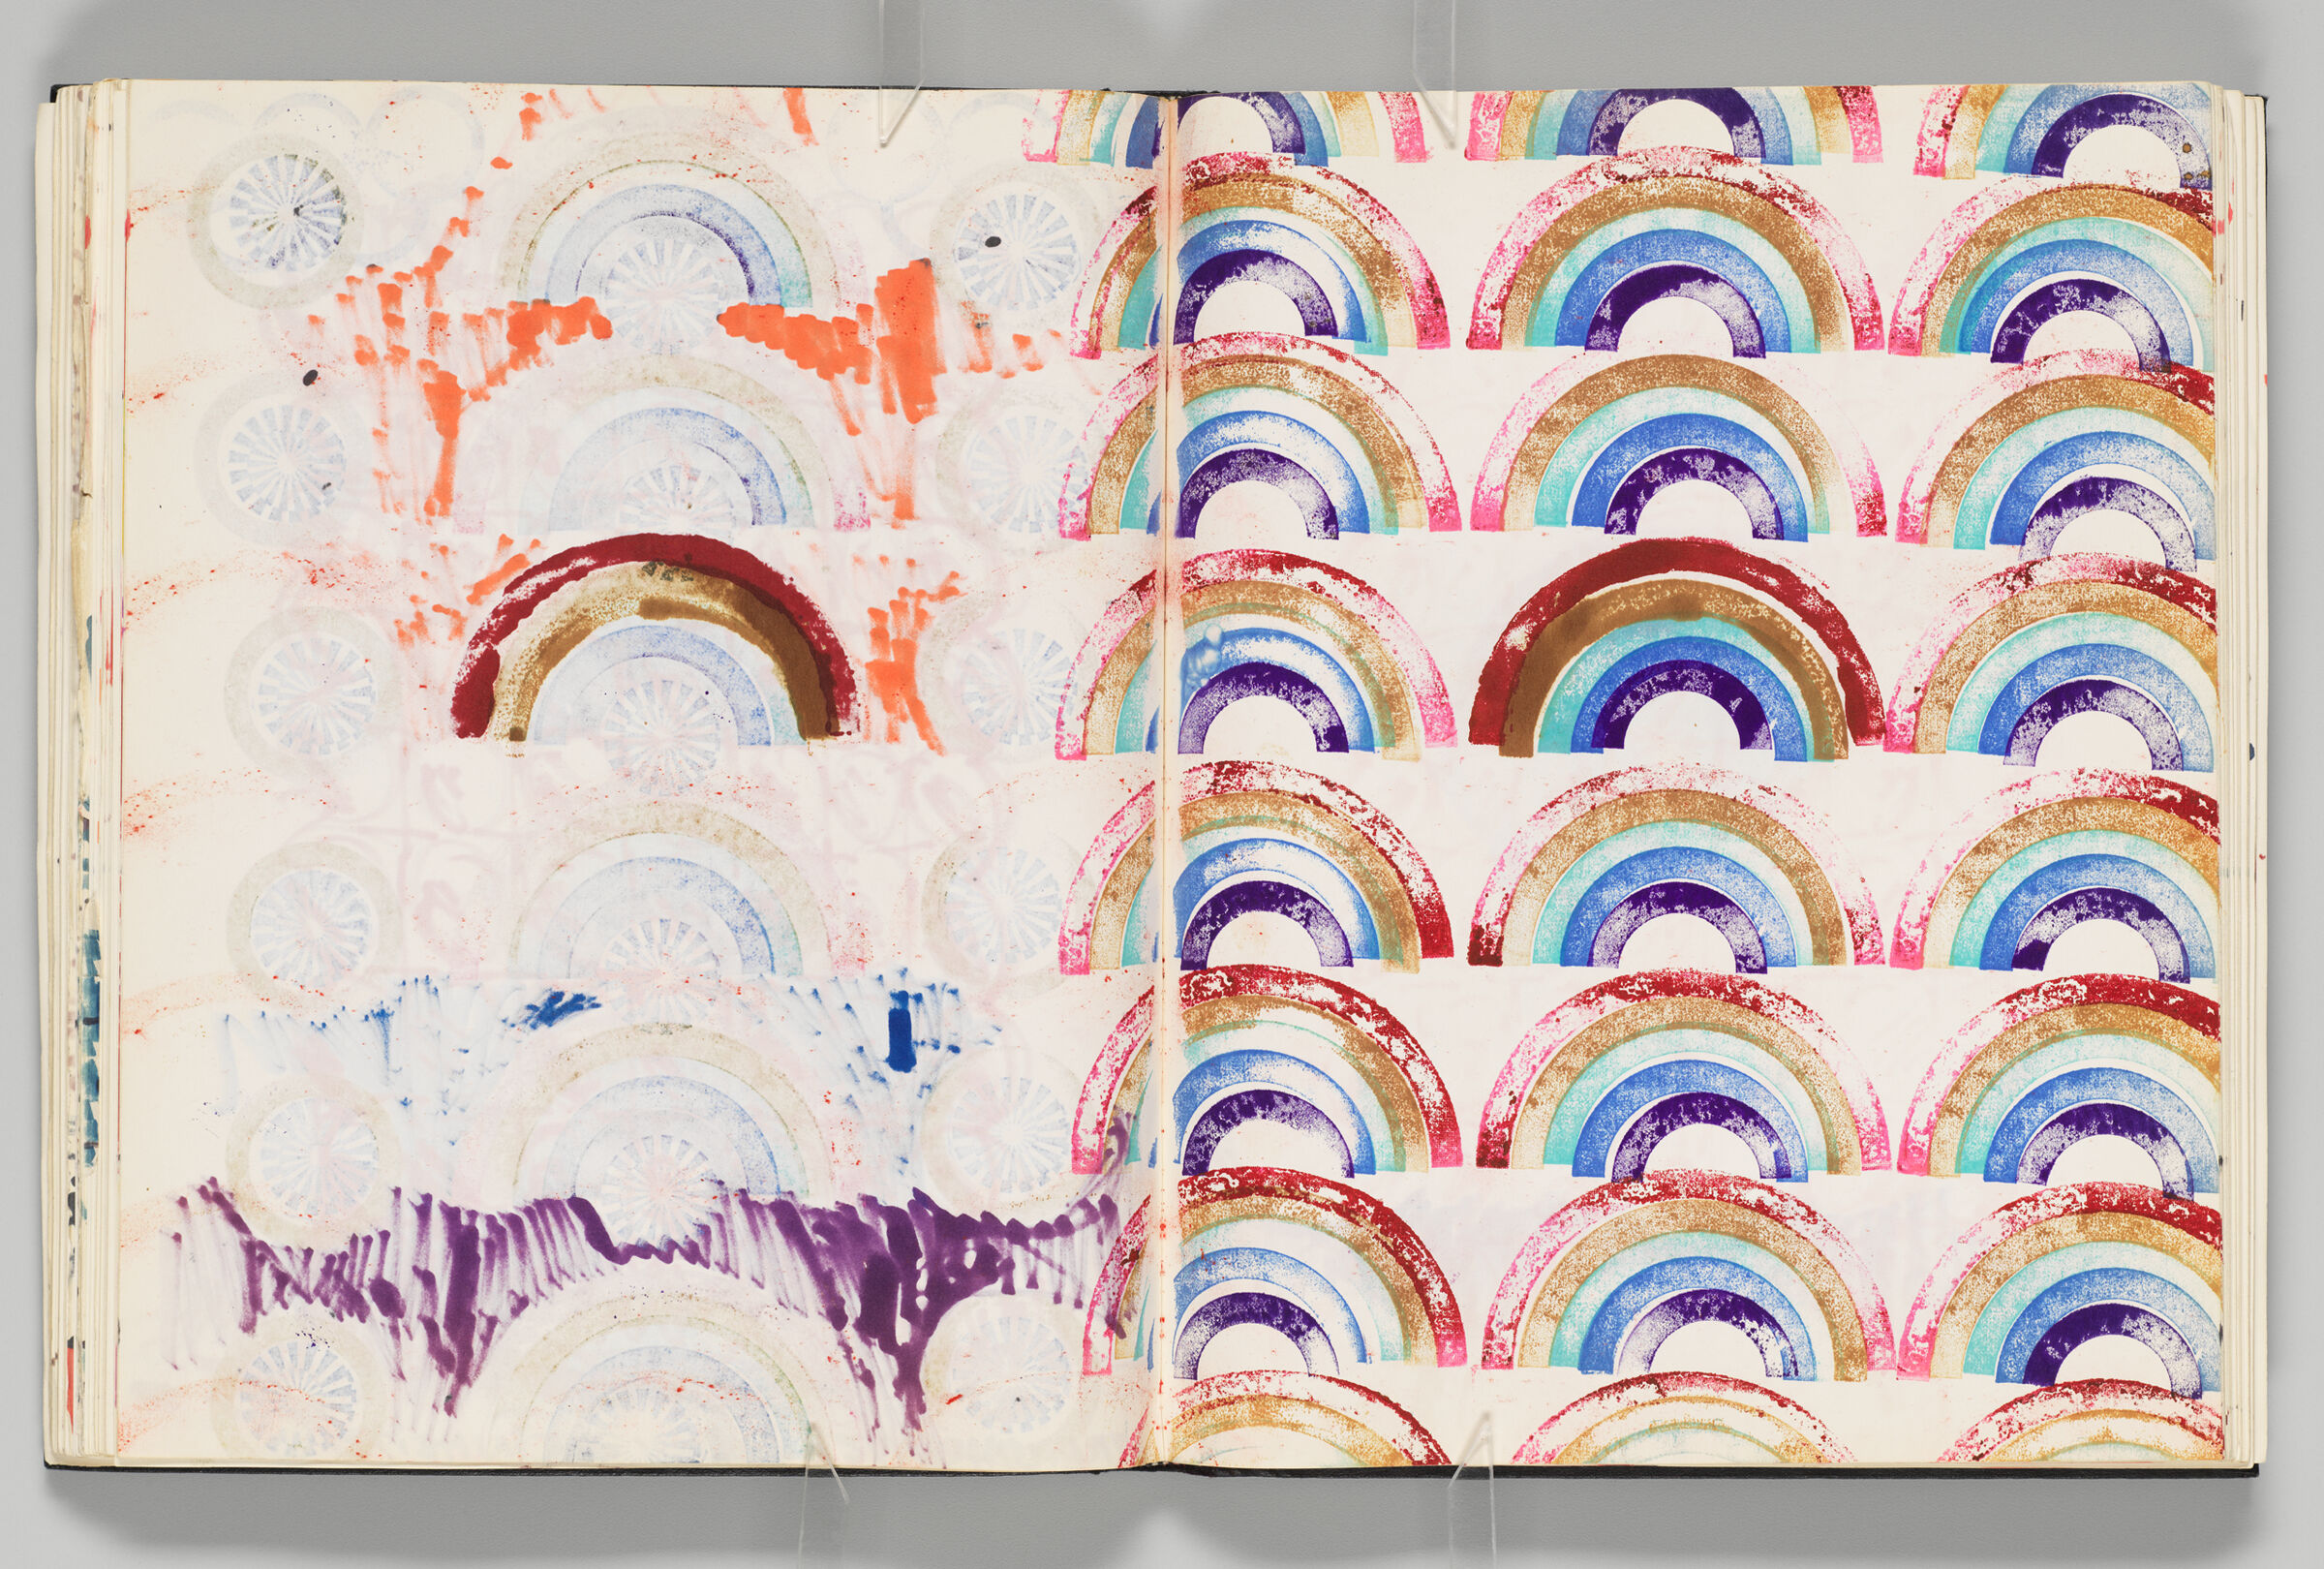 Untitled (Bleed-Through Of Previous Page, Left Page); Untitled (Rows Of Rainbow Stamp Impressions, Right Page)